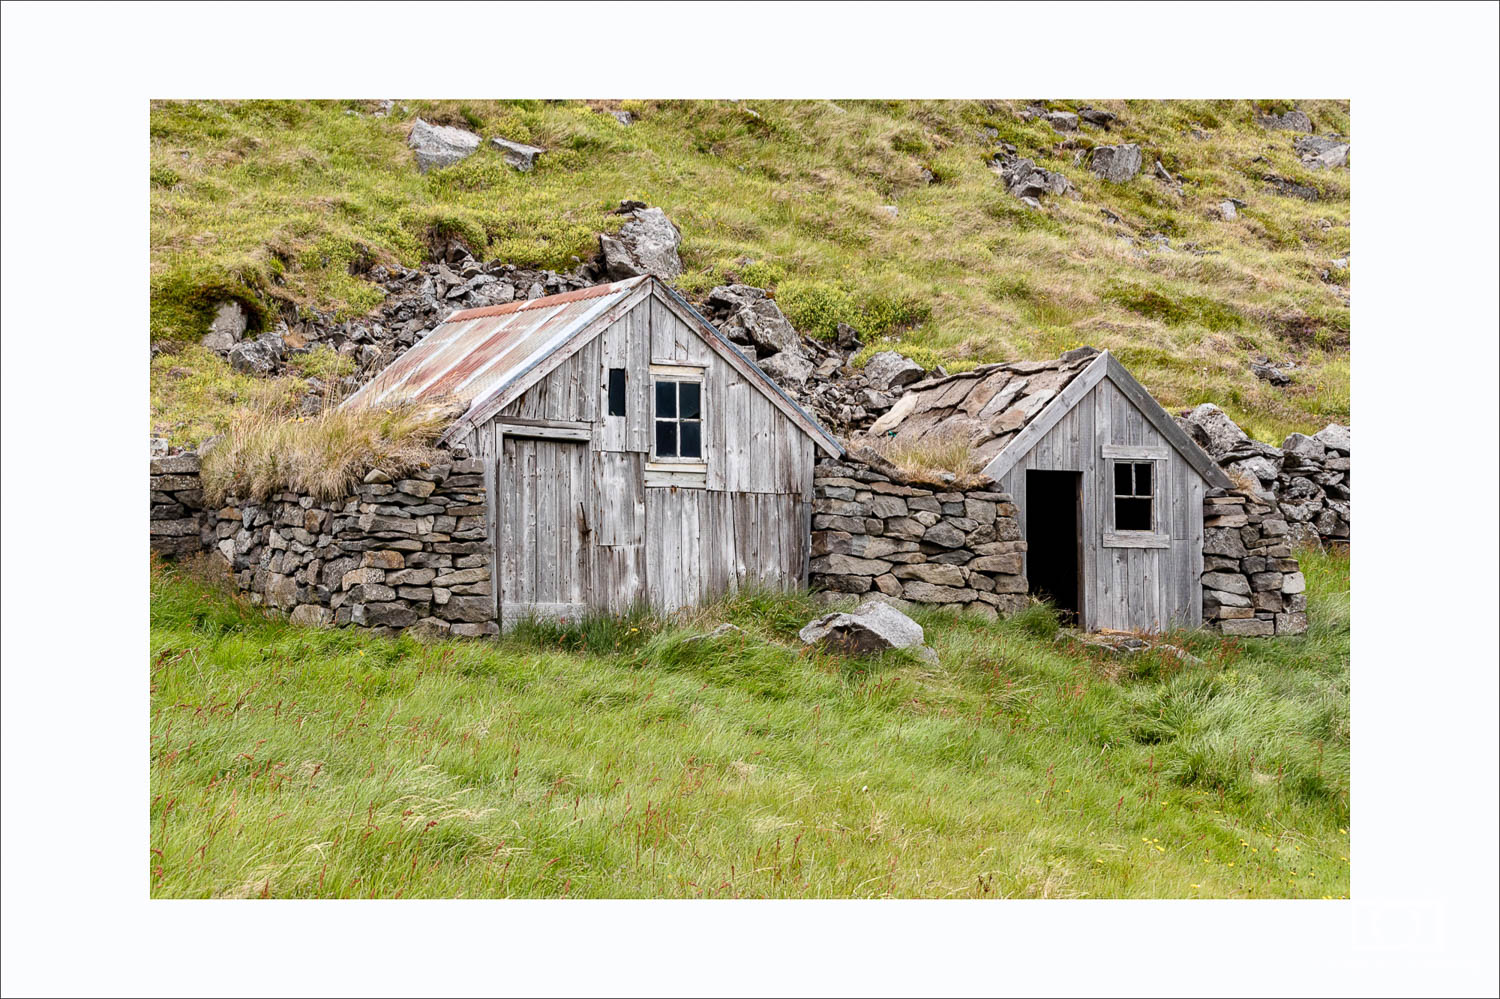 Iceland grass-roof houses